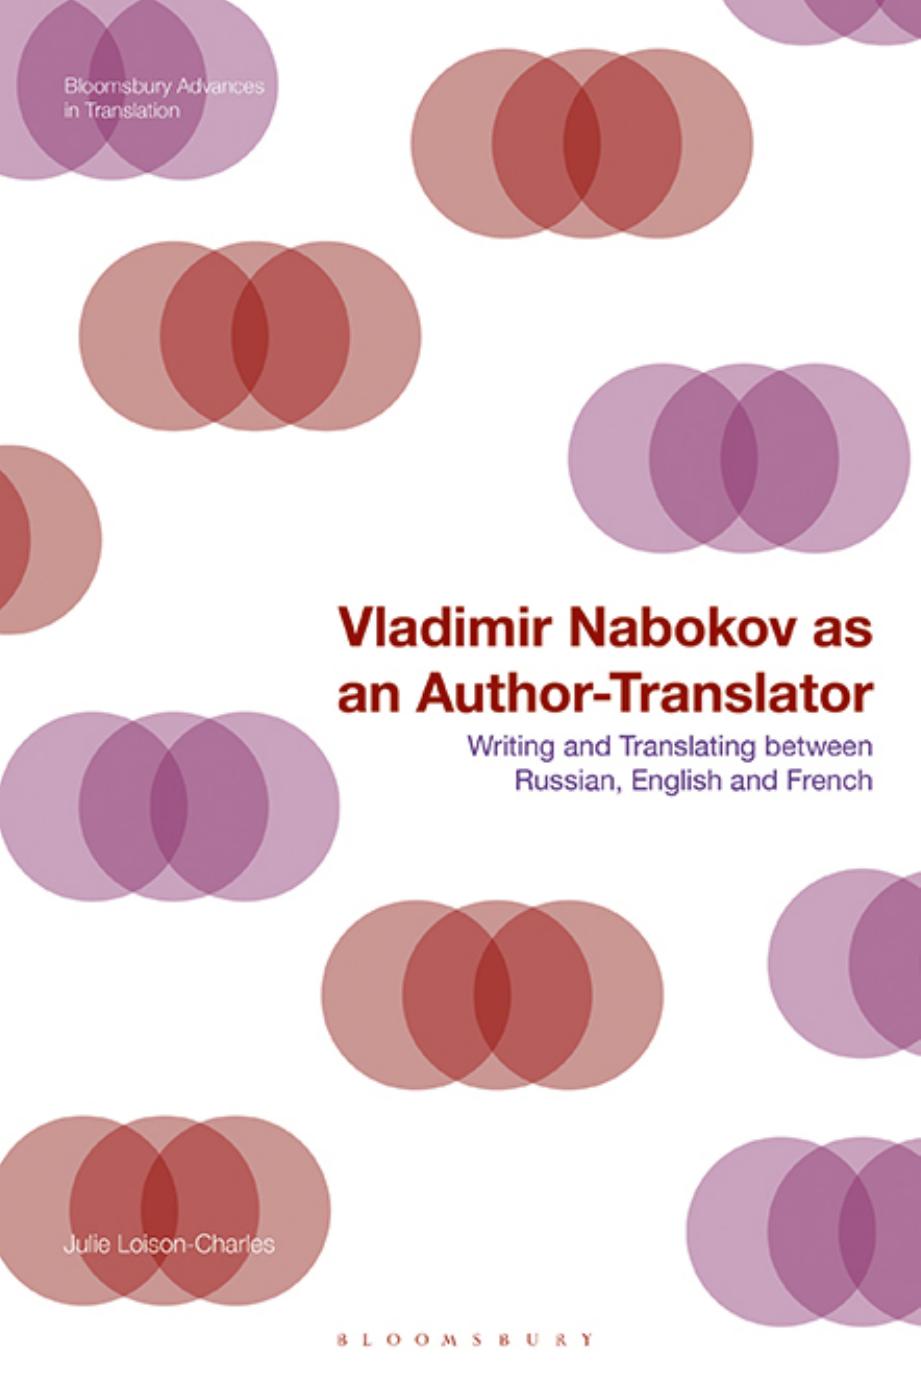 Vladimir Nabokov as an Author-Translator: Writing and Translating between Russian, English and French by Julie Loison-Charles